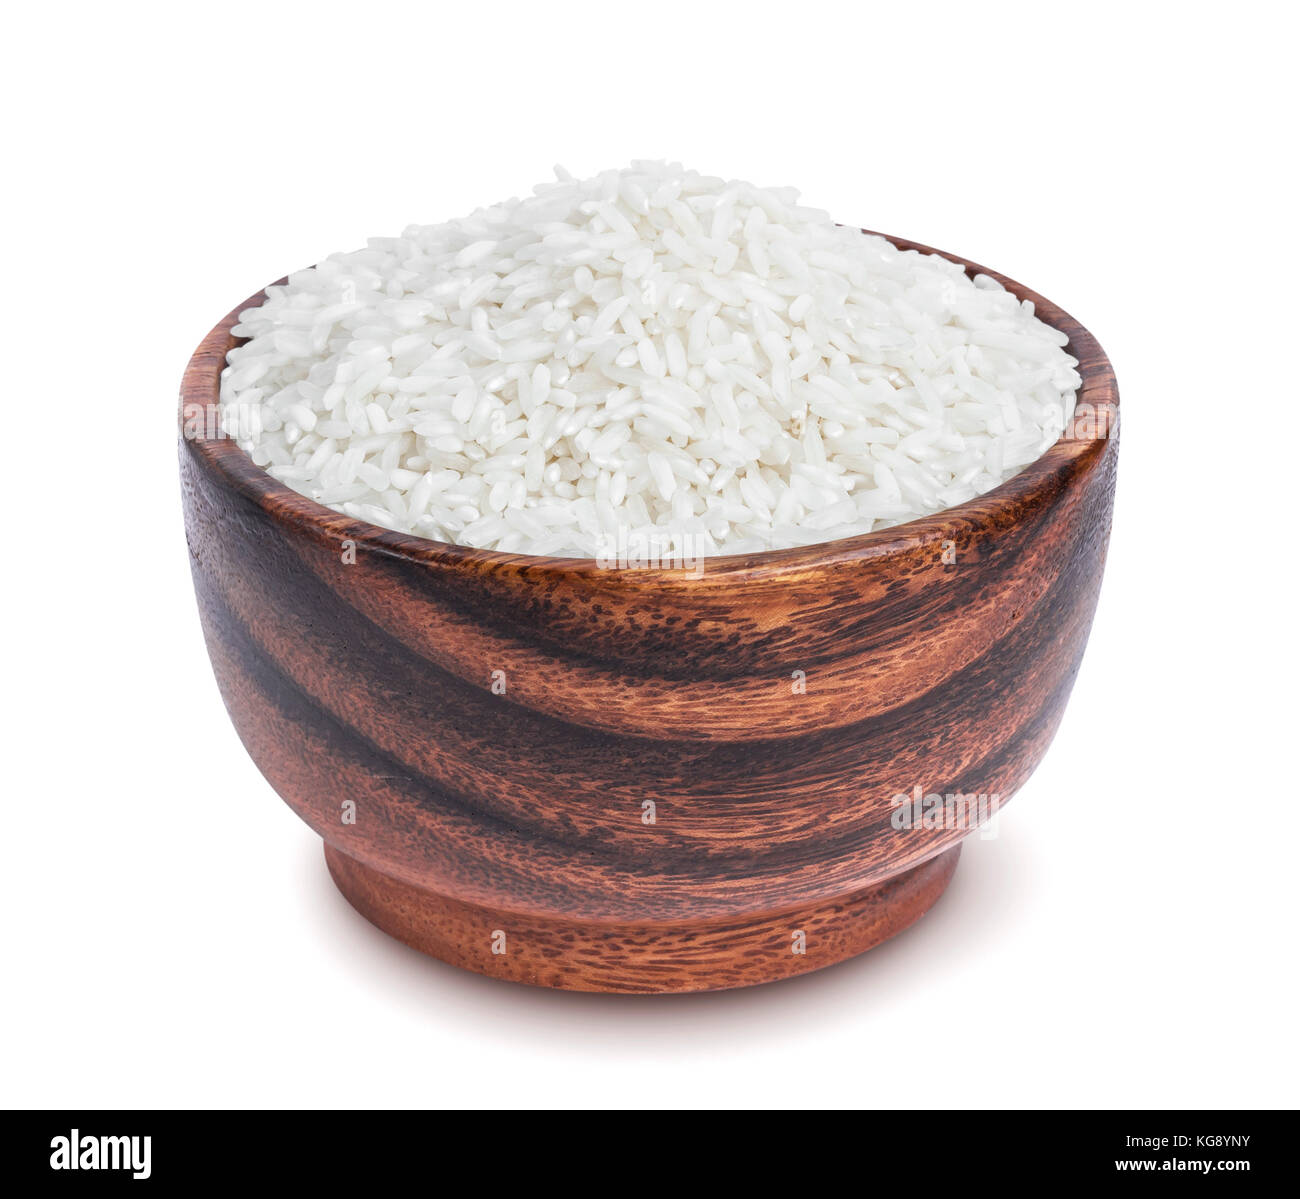 Basmati rice in wooden bowl isolated on white background Stock Photo